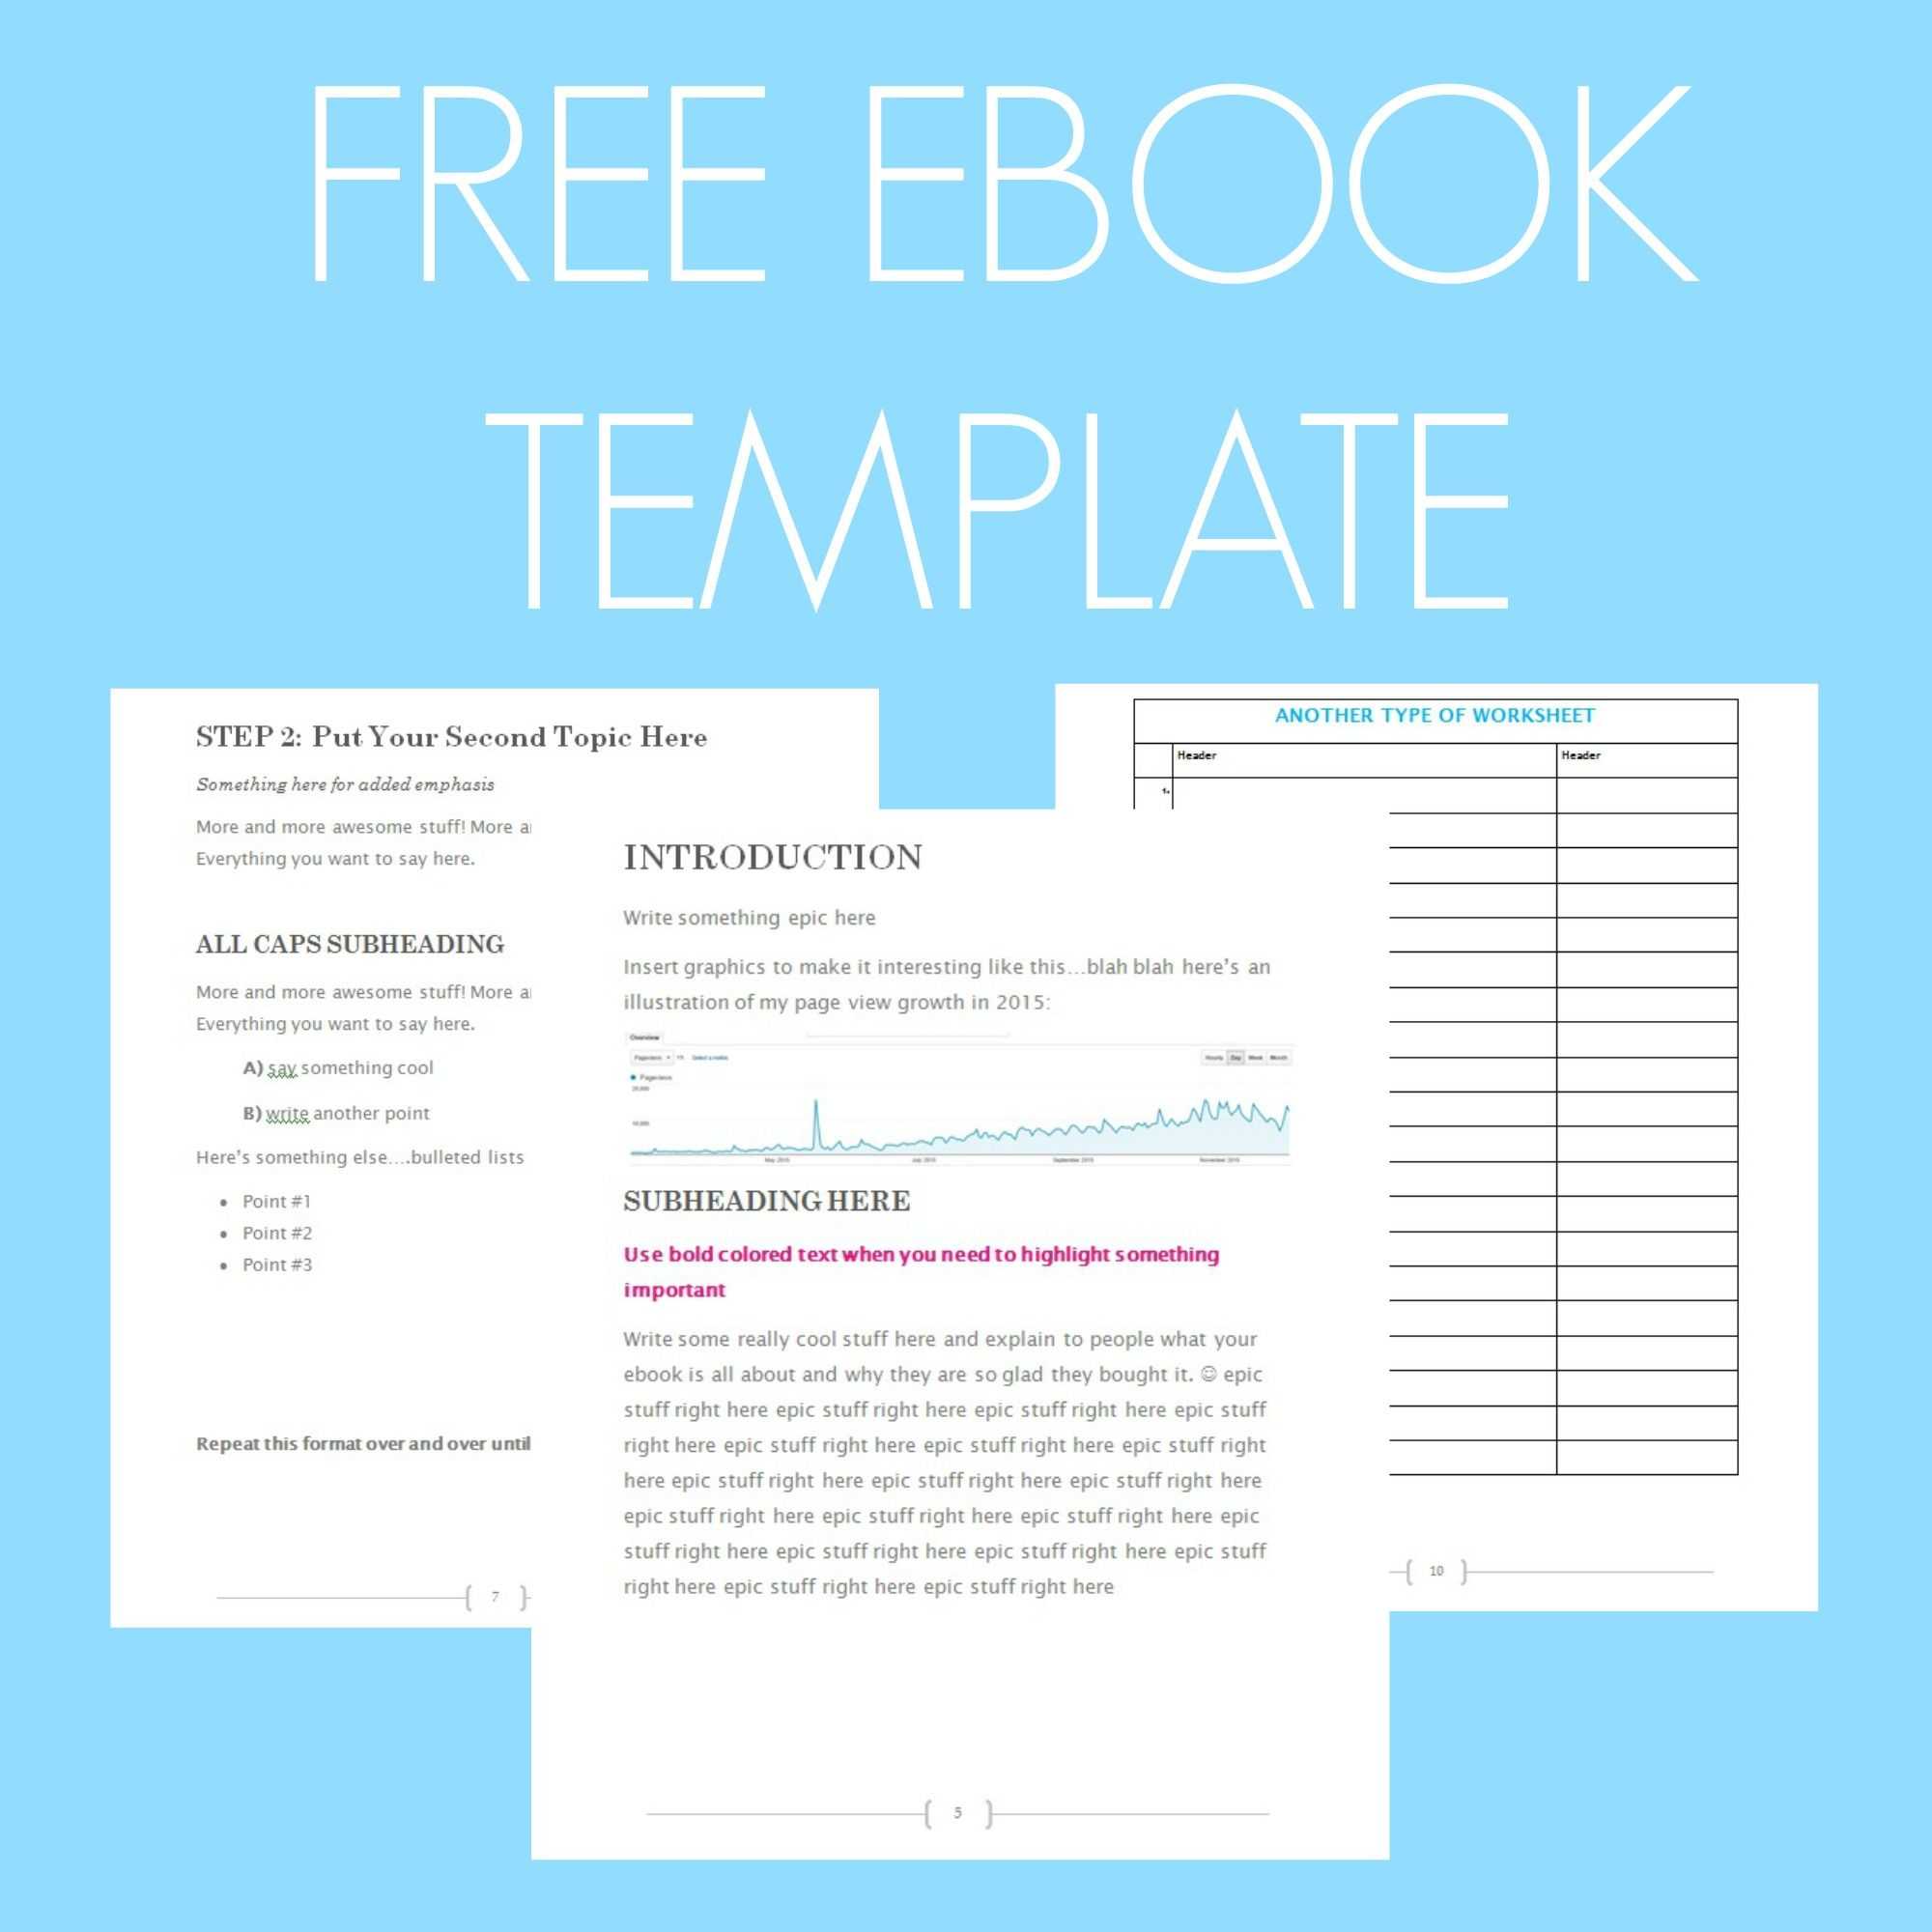 Free Ebook Template – Preformatted Word Document | Writing With Microsoft Word Table Of Contents Template